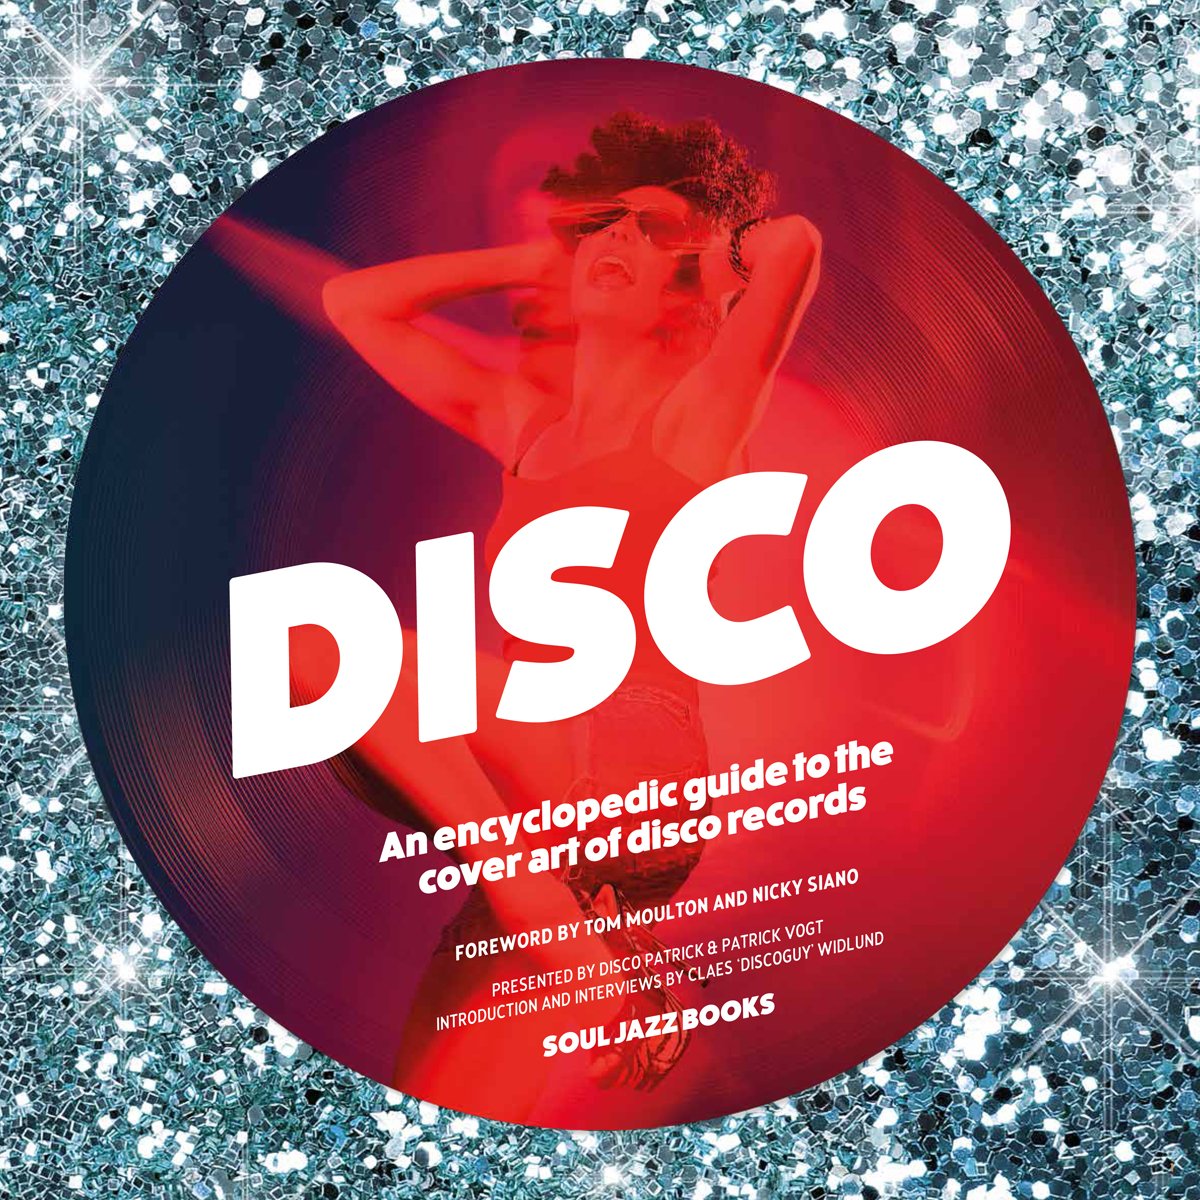 Disco: An Encyclopaedic Guide To The Cover Art Of Disco Records